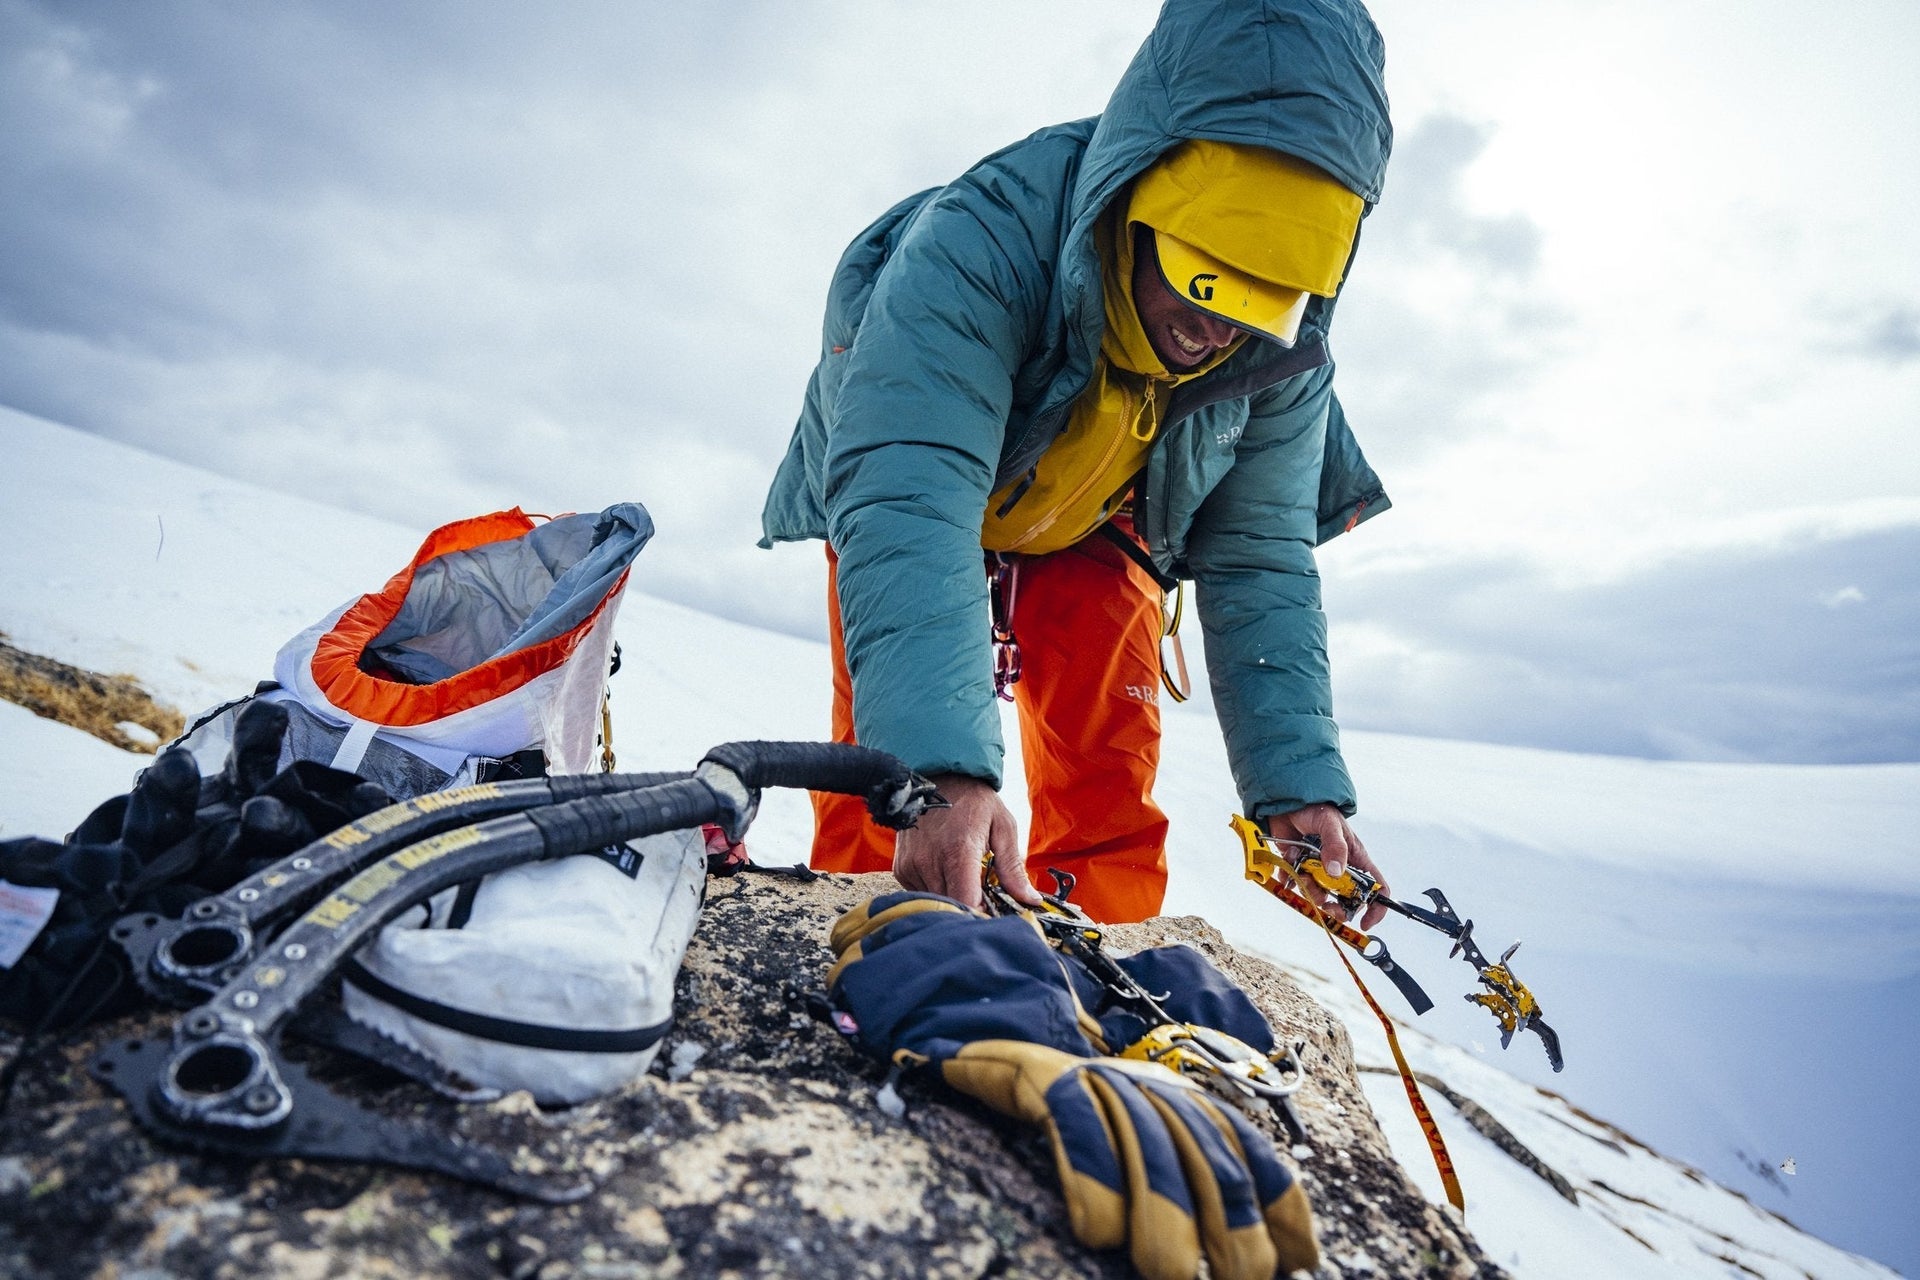 A man is preparing his gear on top of a snowy mountain.